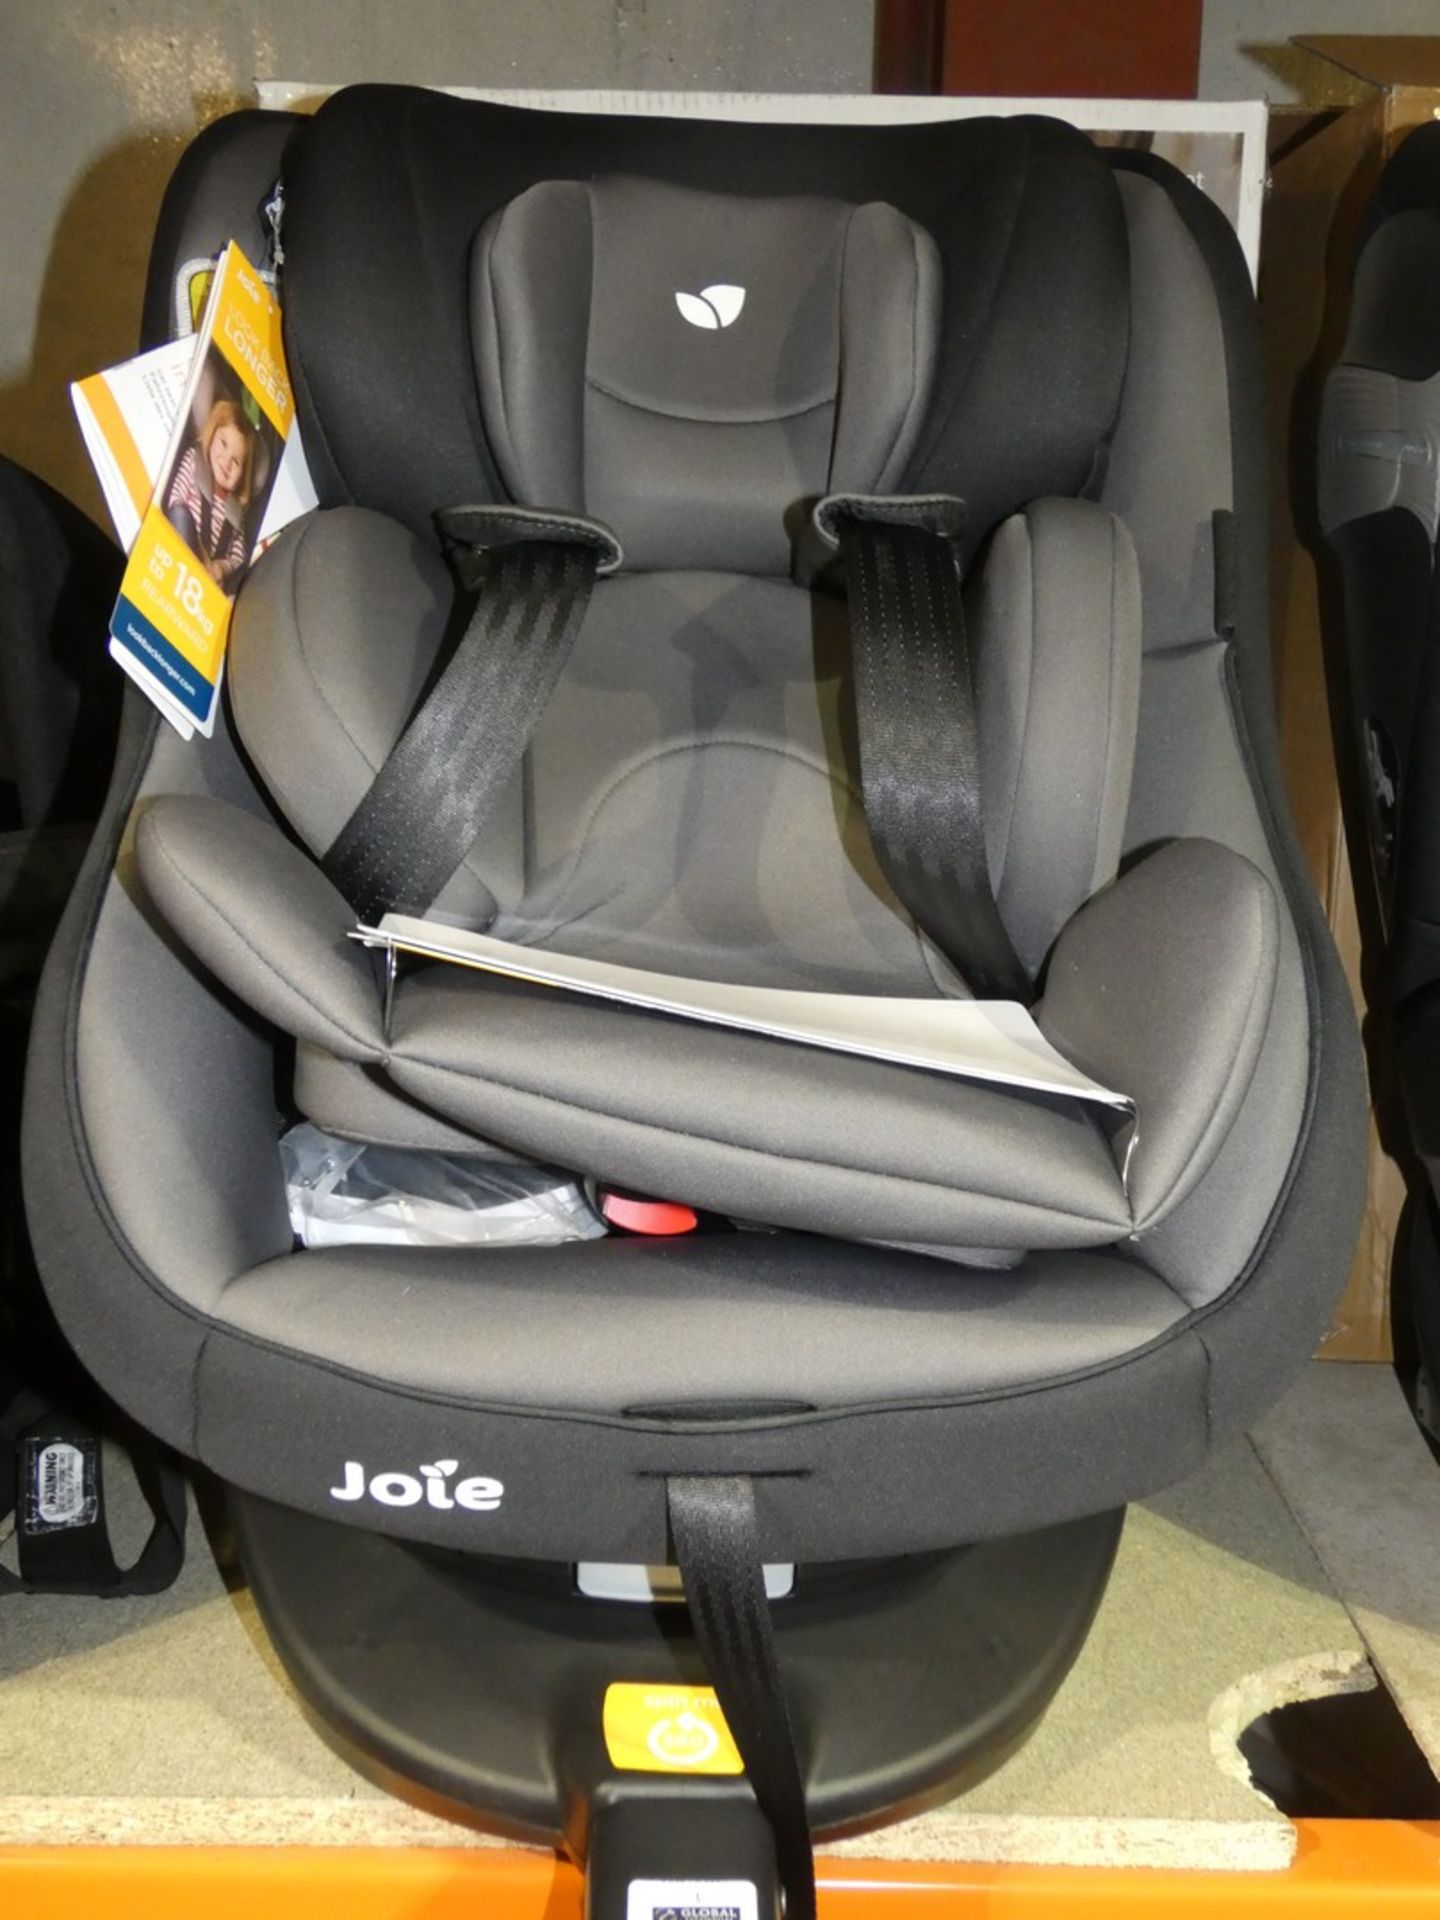 Boxed Joie Meet Spin 360 Swivelling Kids Safety Seat (759954) RRP £260